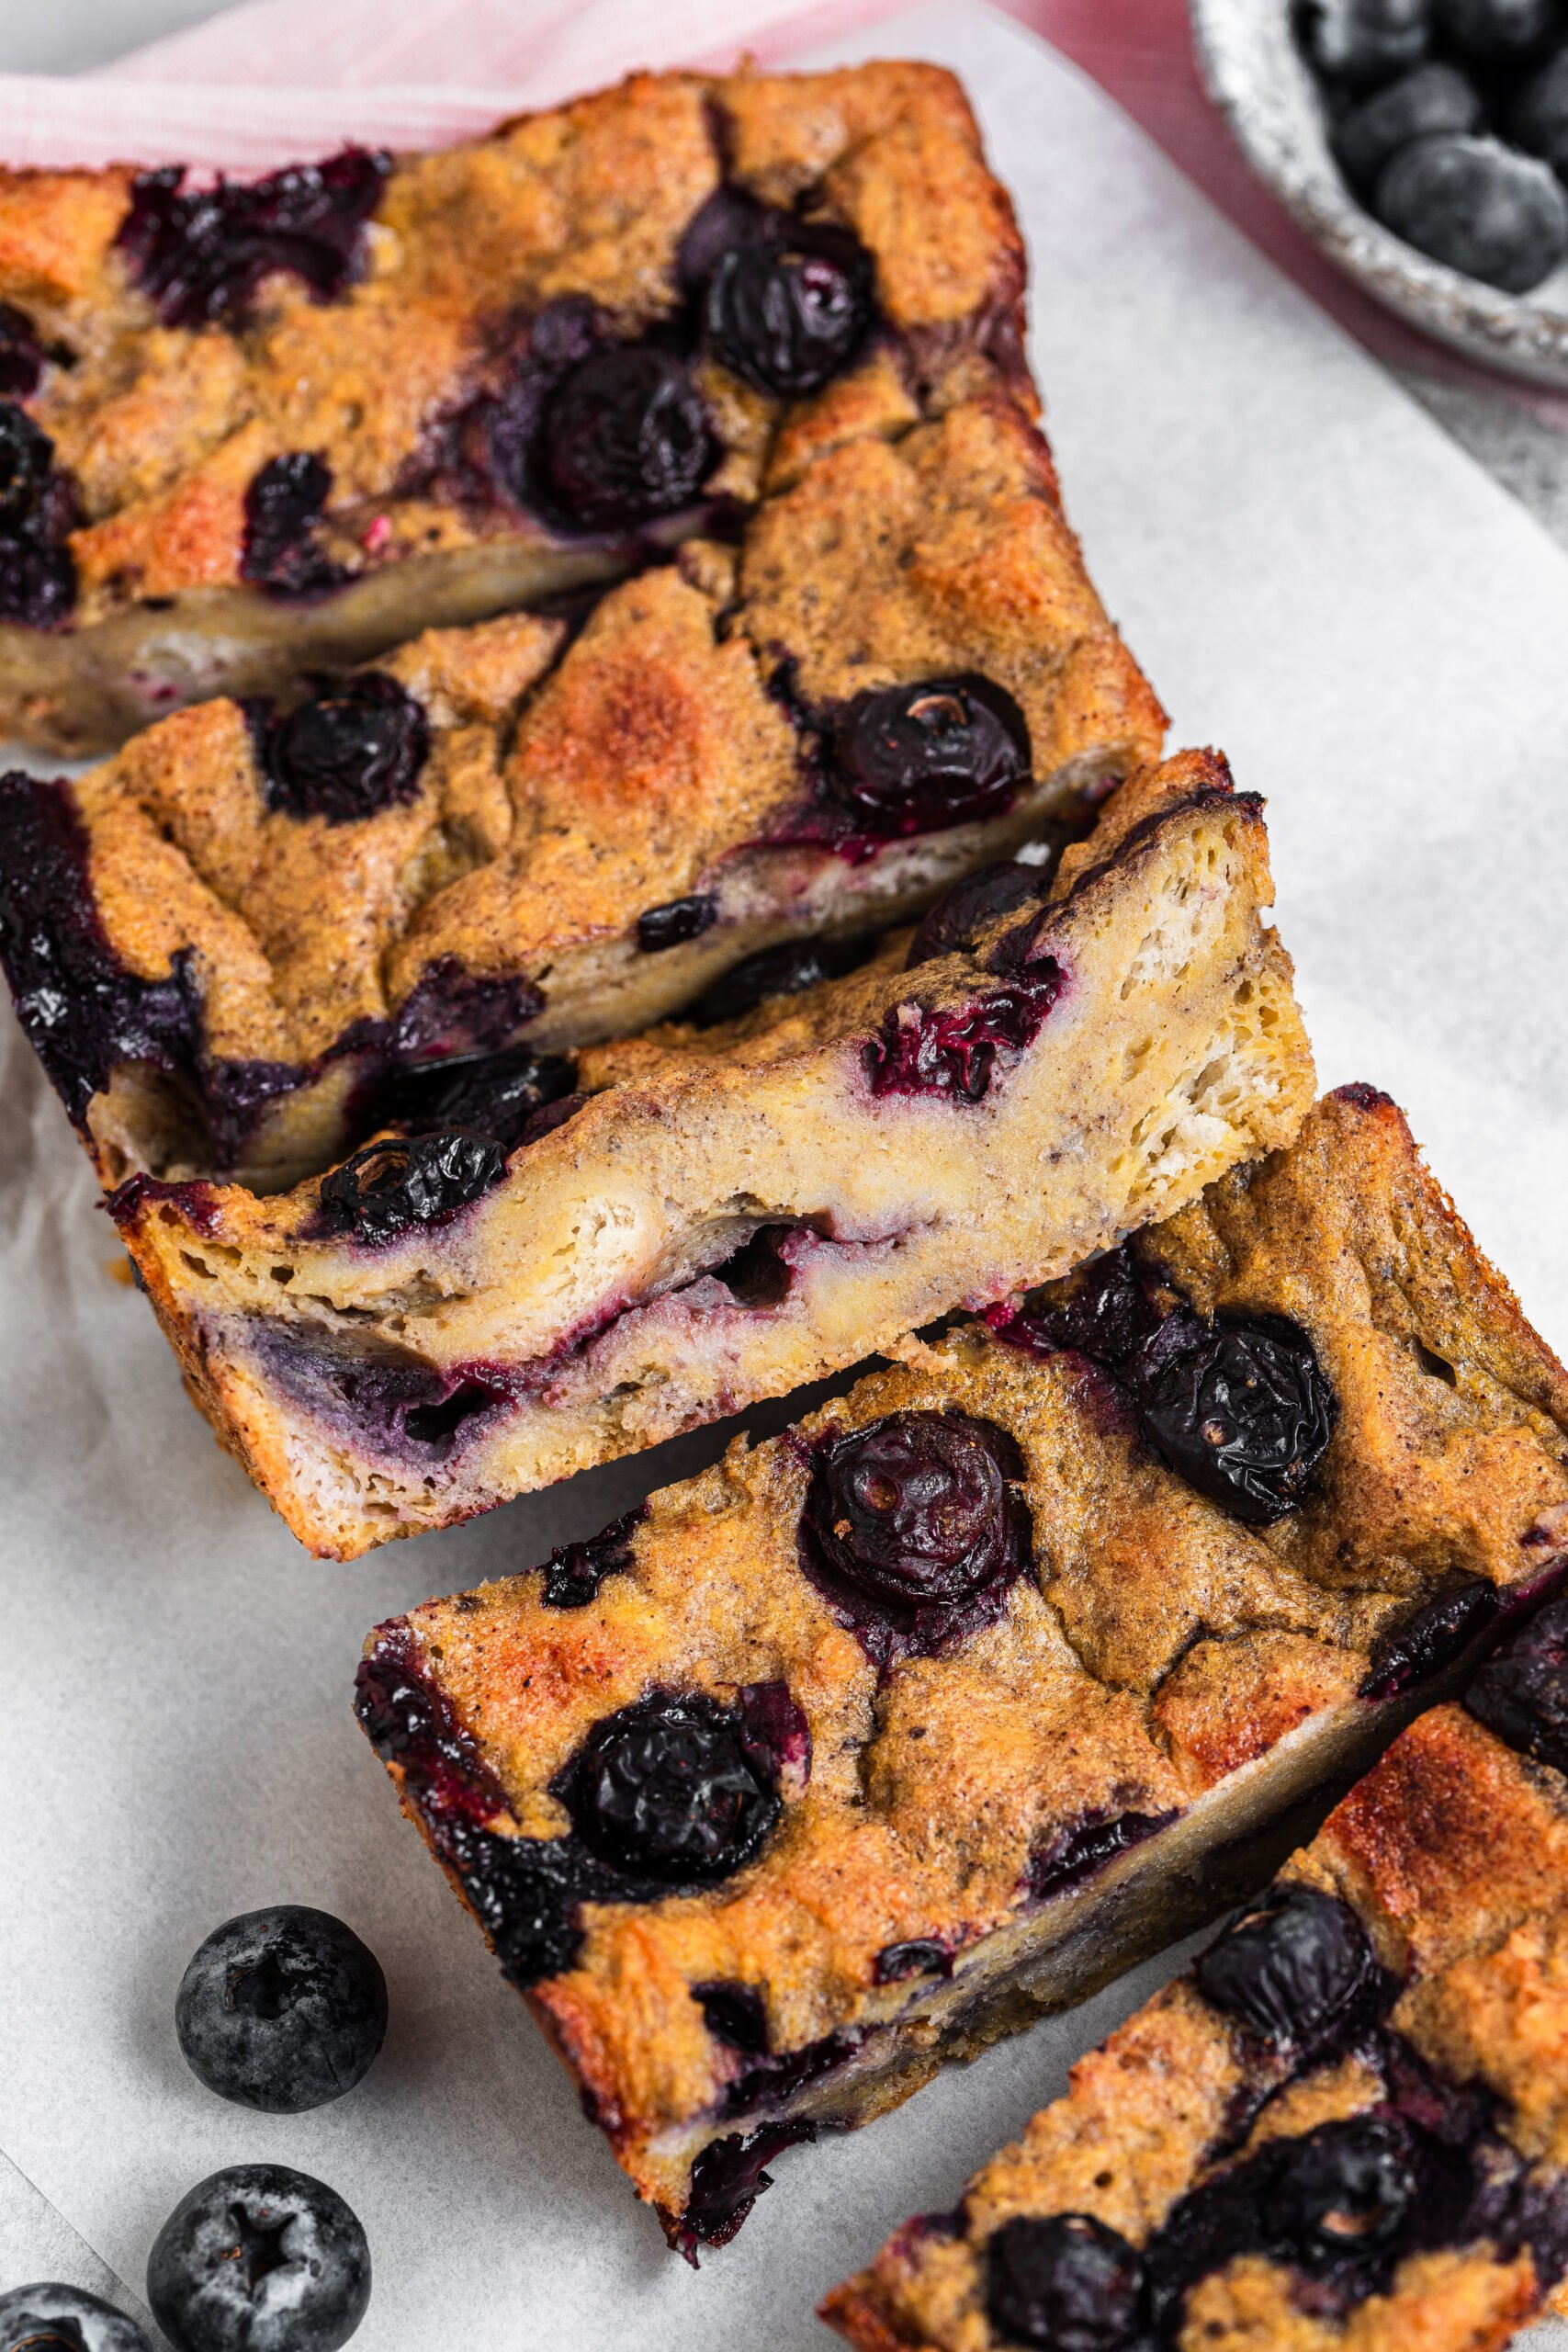 Blueberry French toast bake sliced into strips